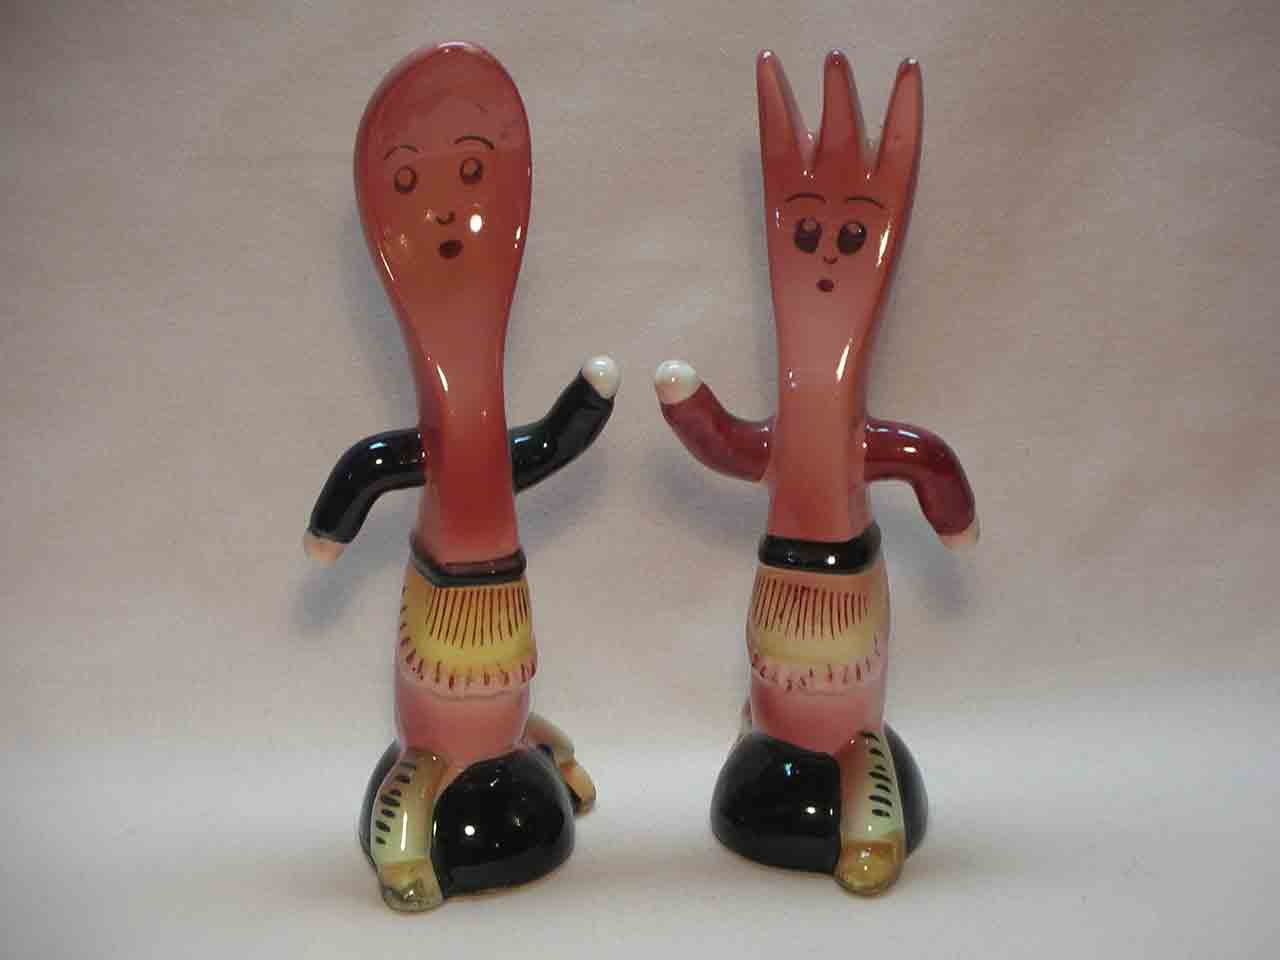 Anthropomorphic fork and spoon salt and pepper shakers